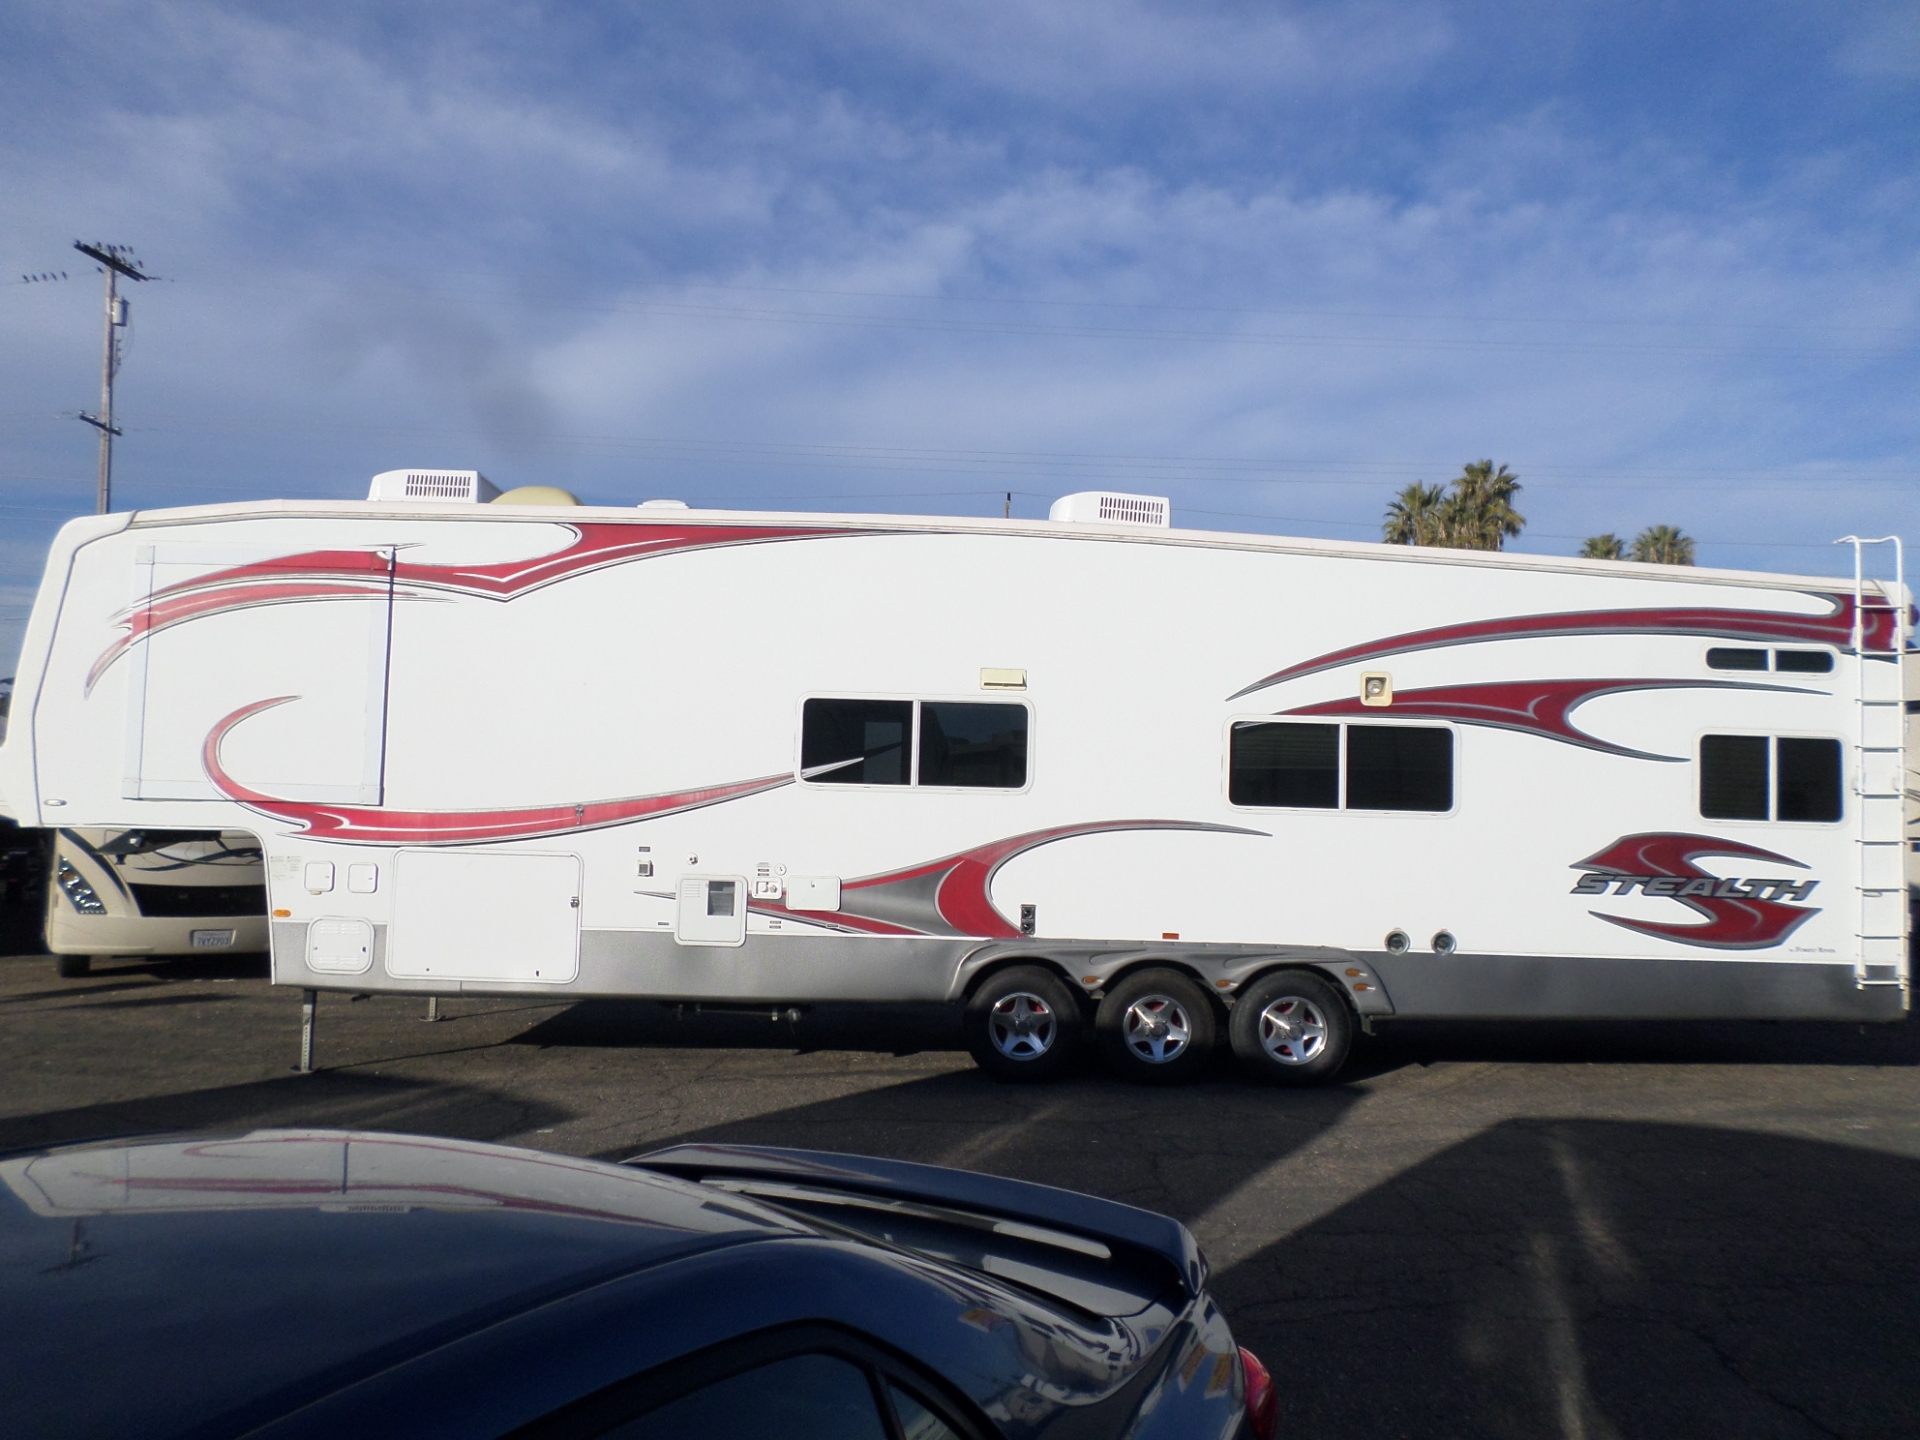 RV for sale: 2010 Forest River Stealth 5th Wheel Toy Hauler 39' in Lodi Stockton CA - Lodi Park 2010 Forest River Stealth Toy Hauler Specs